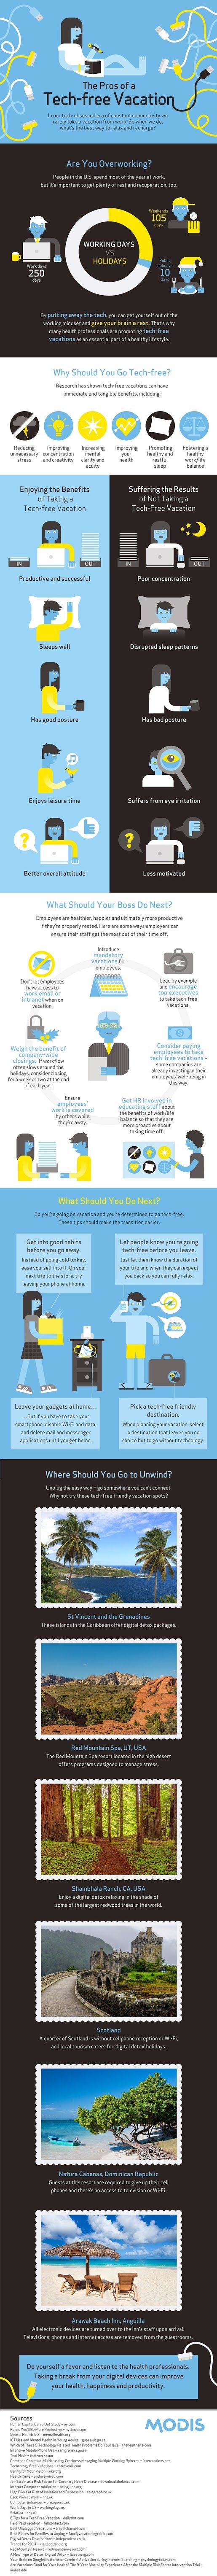 Psychology-Infographic-The-Pros-of-a-Tech-free-Vacation-infographic-Health-Technology-Travel Psychology Infographic : The Pros of a Tech-free Vacation #infographic